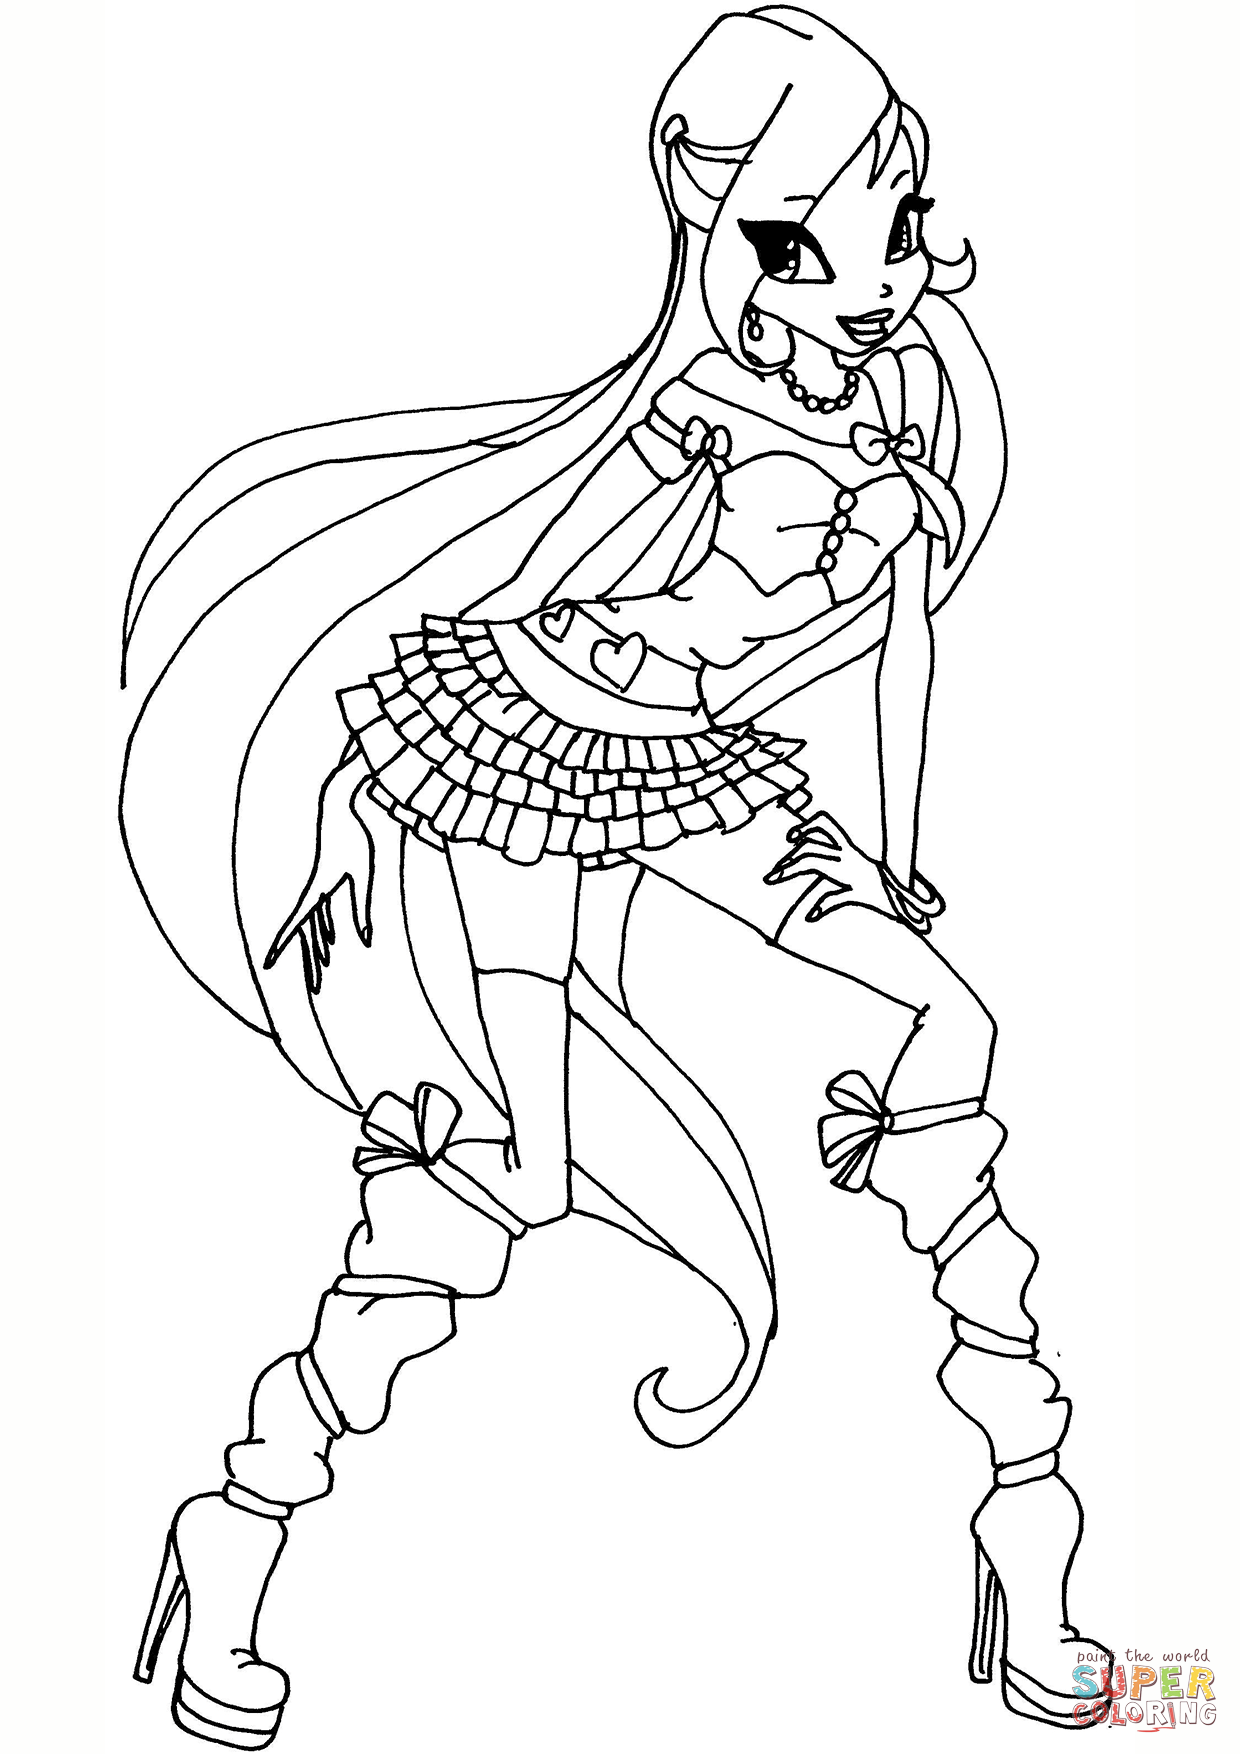 Winx Club Bloom Coloring Pages at GetColorings.com | Free printable